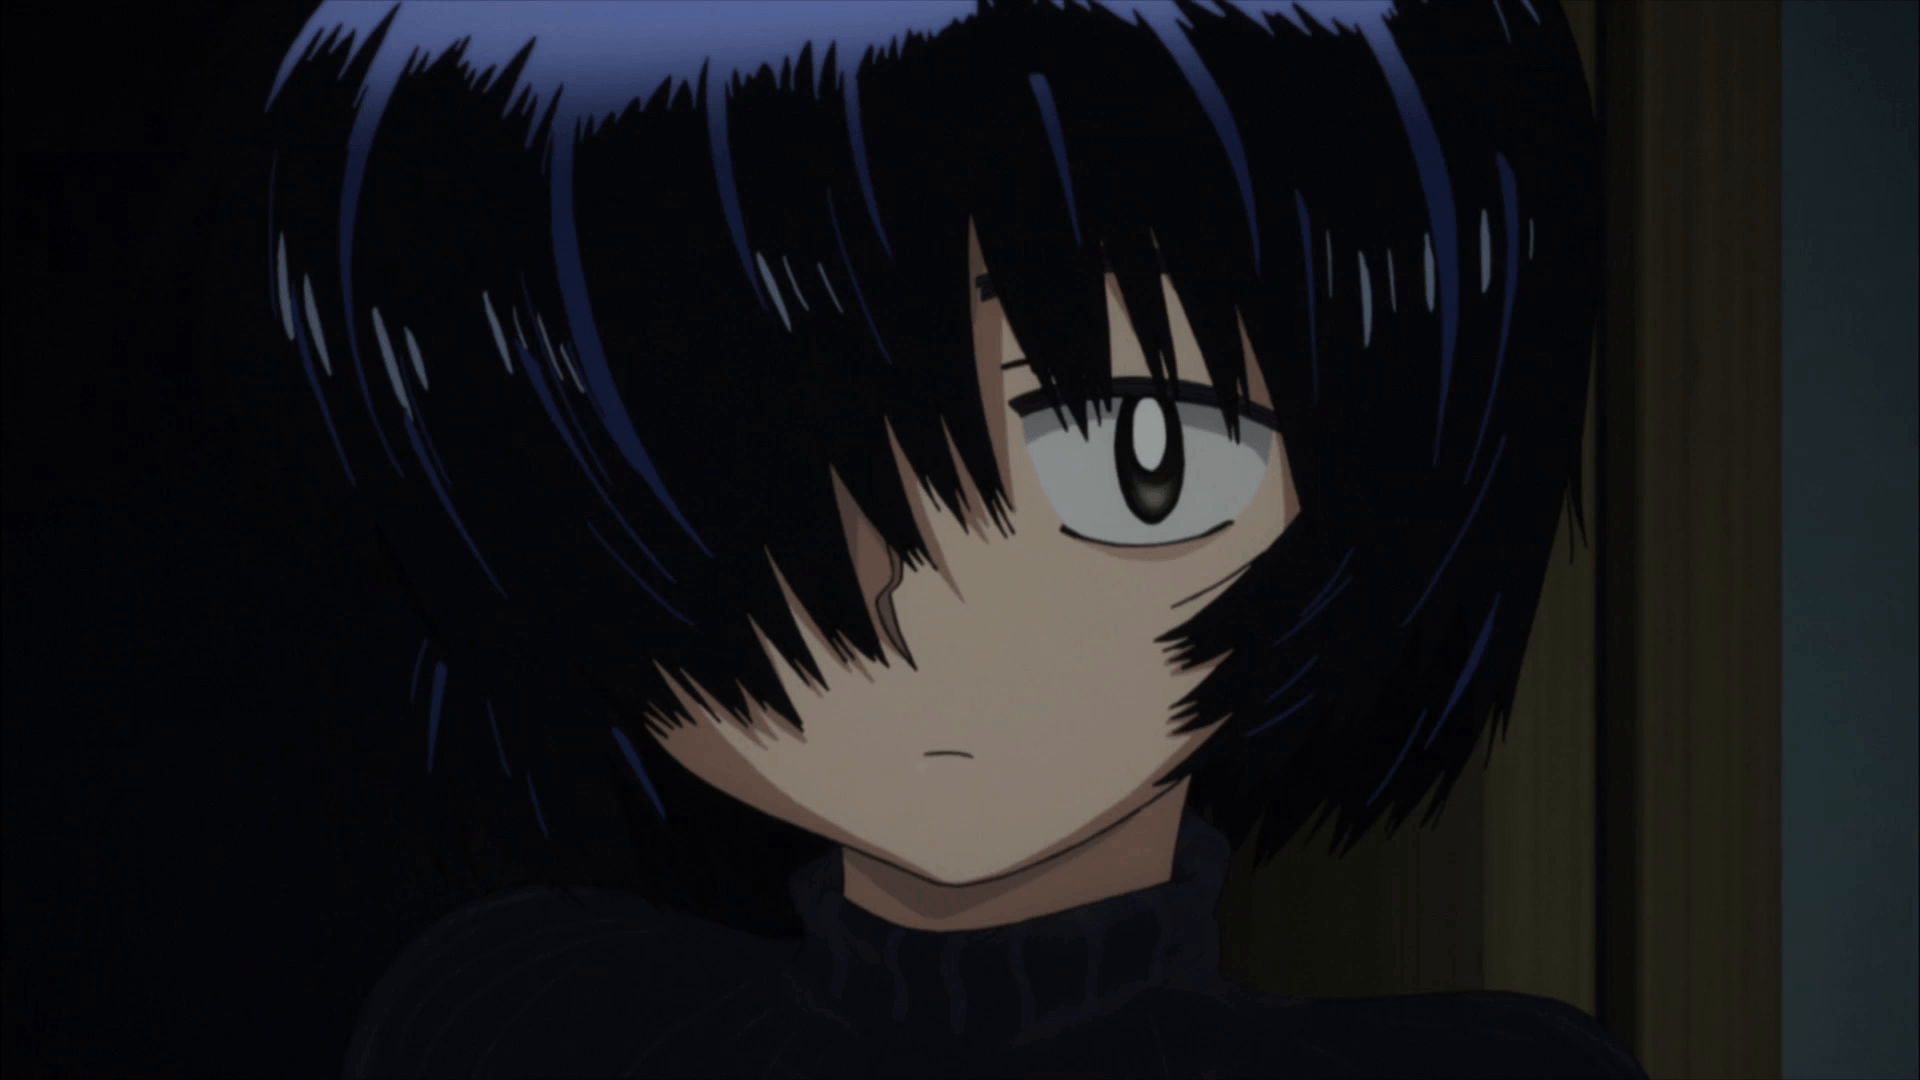 Mobile wallpaper: Anime, Mysterious Girlfriend X, Mikoto Urabe, 940502  download the picture for free.